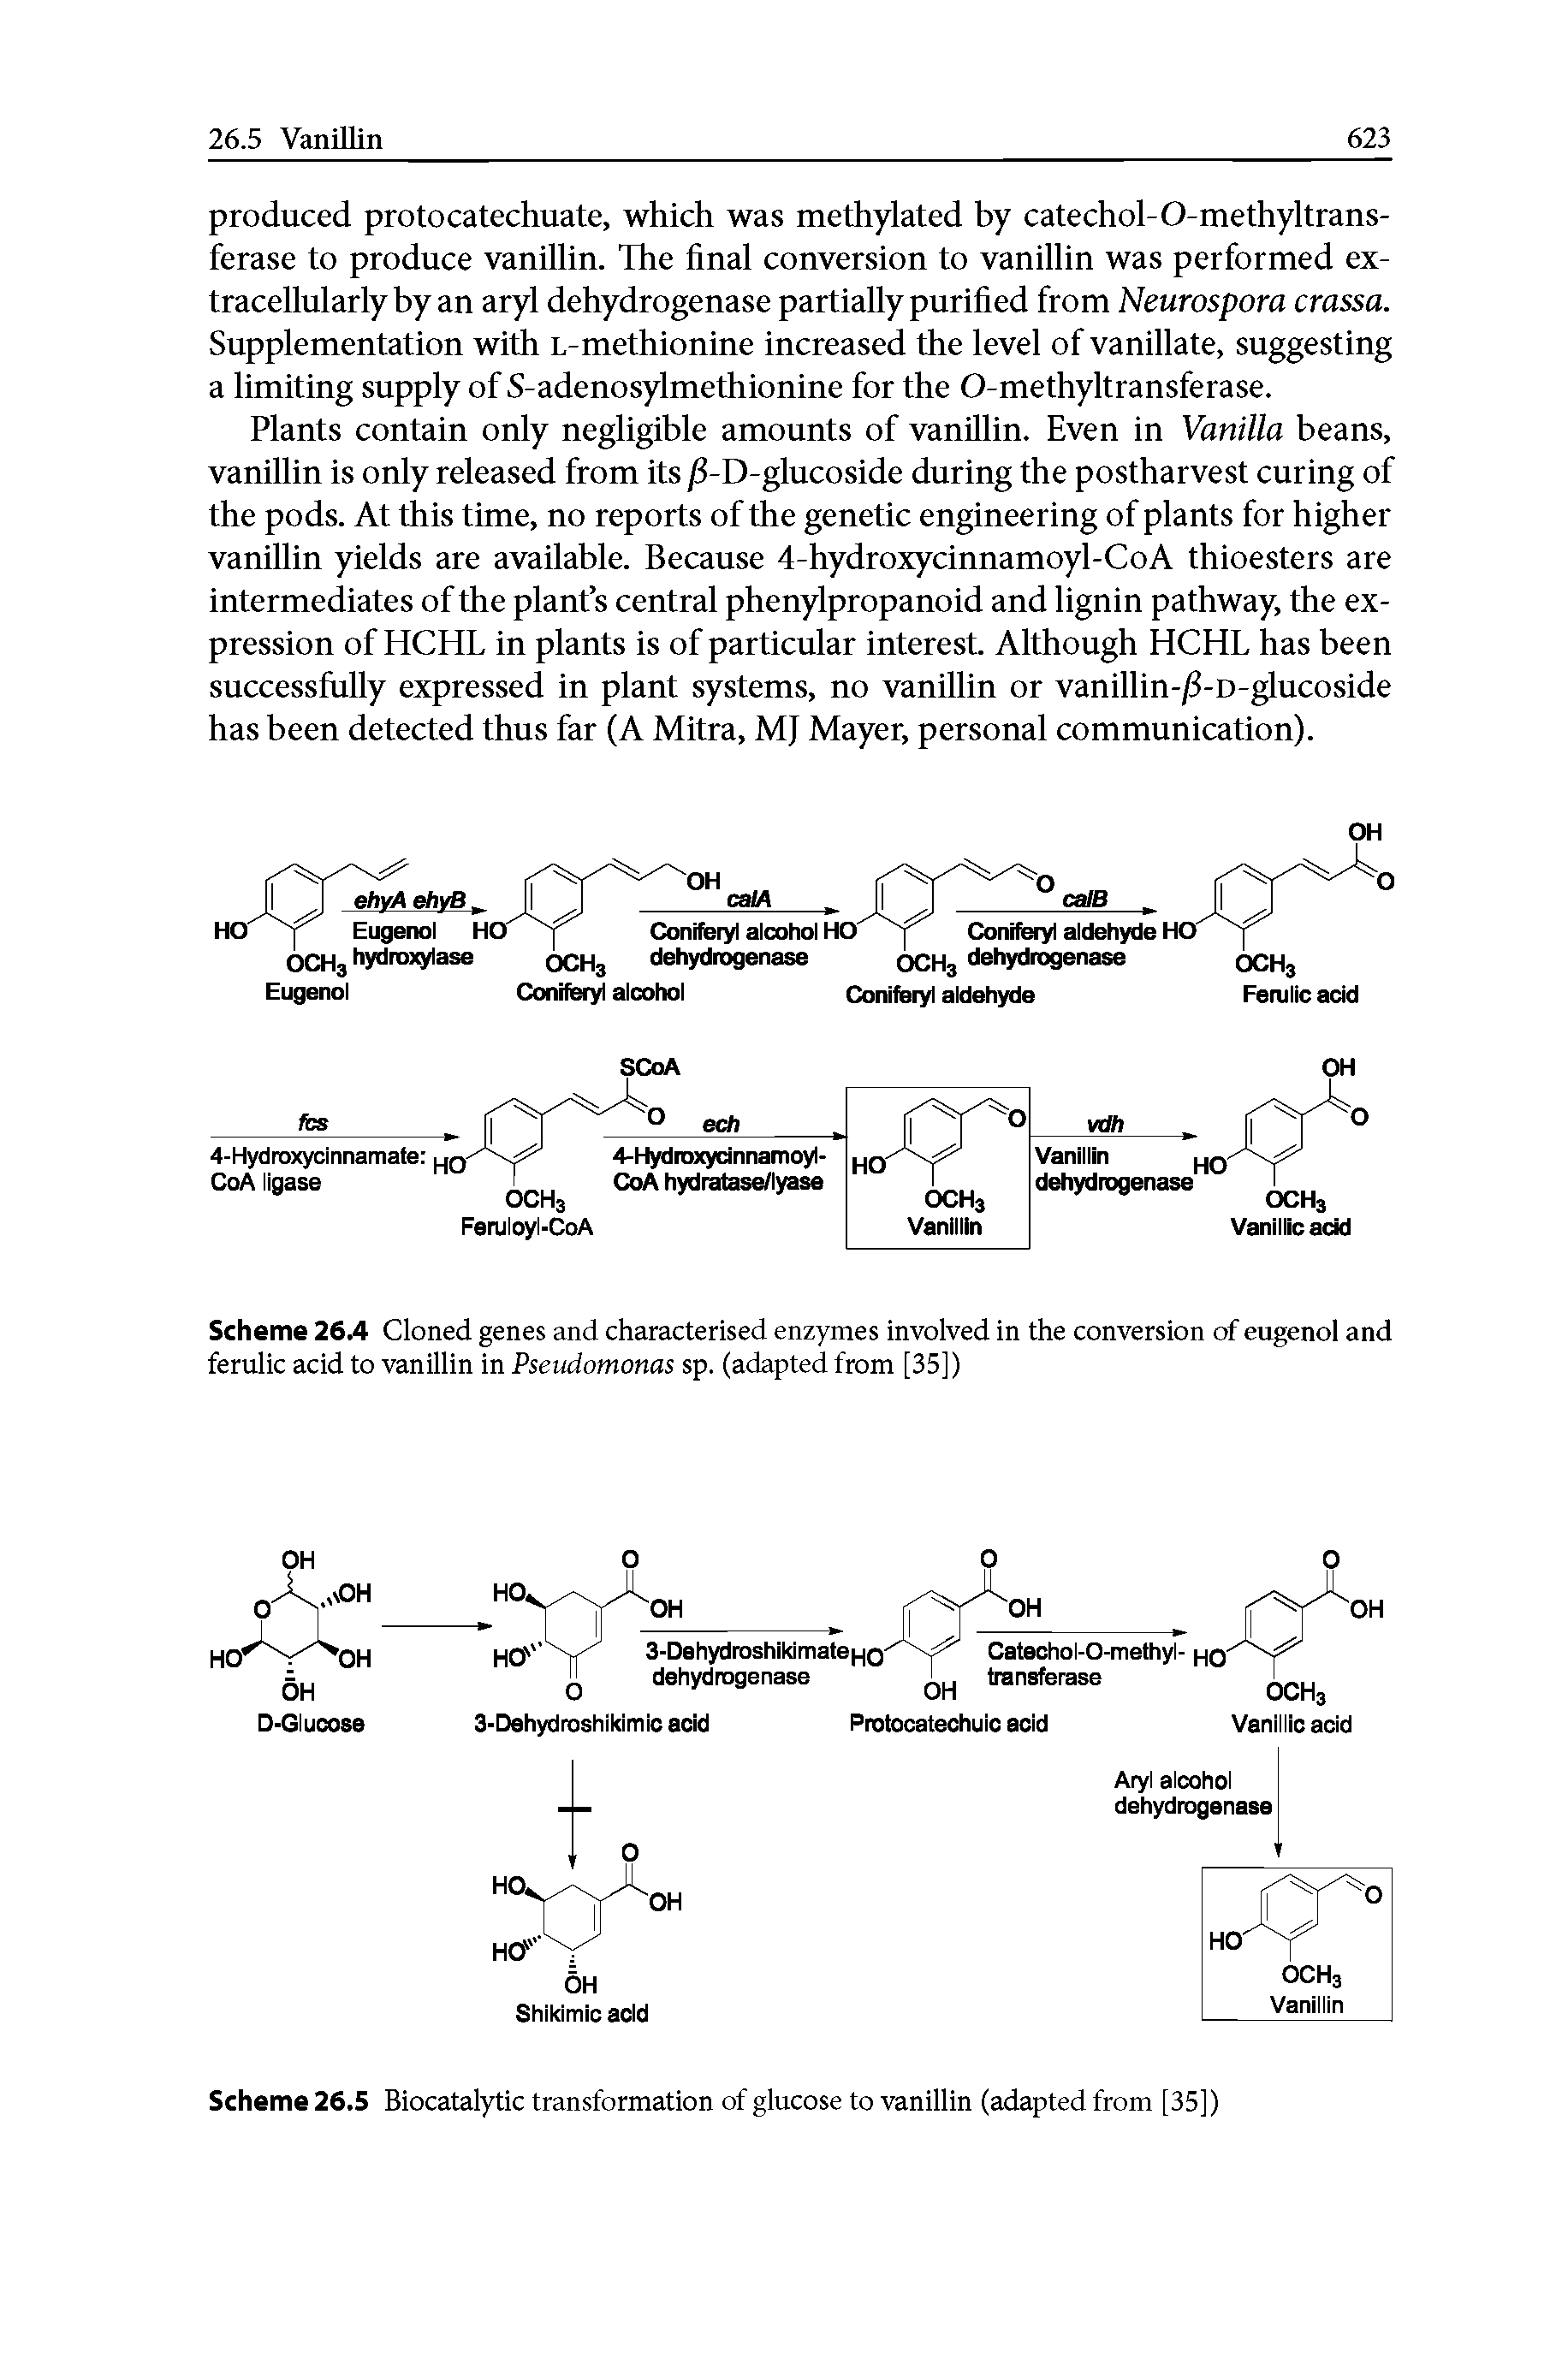 Scheme 26.5 Biocatalytic transformation of glucose to vanillin (adapted from [35])...